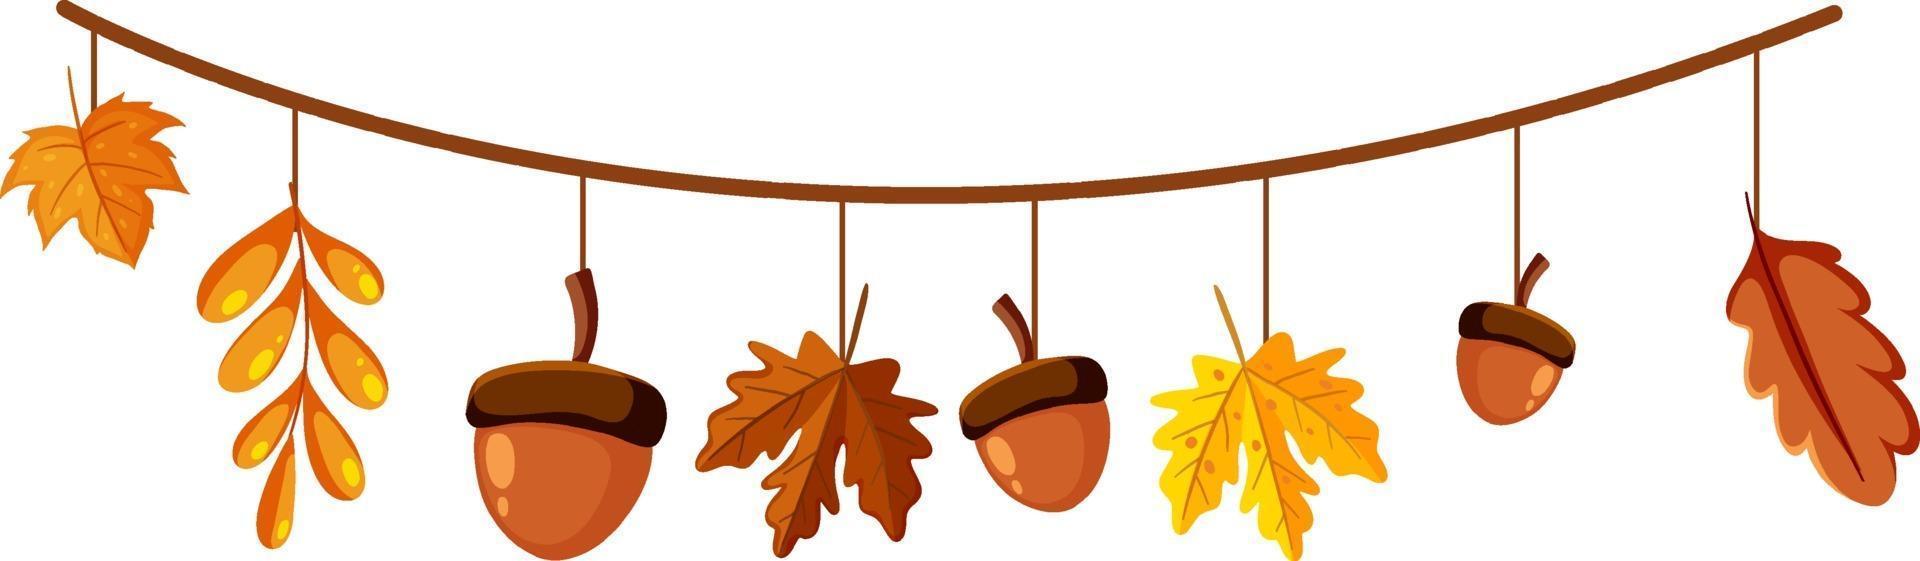 Acorn and fall leaves for decor vector